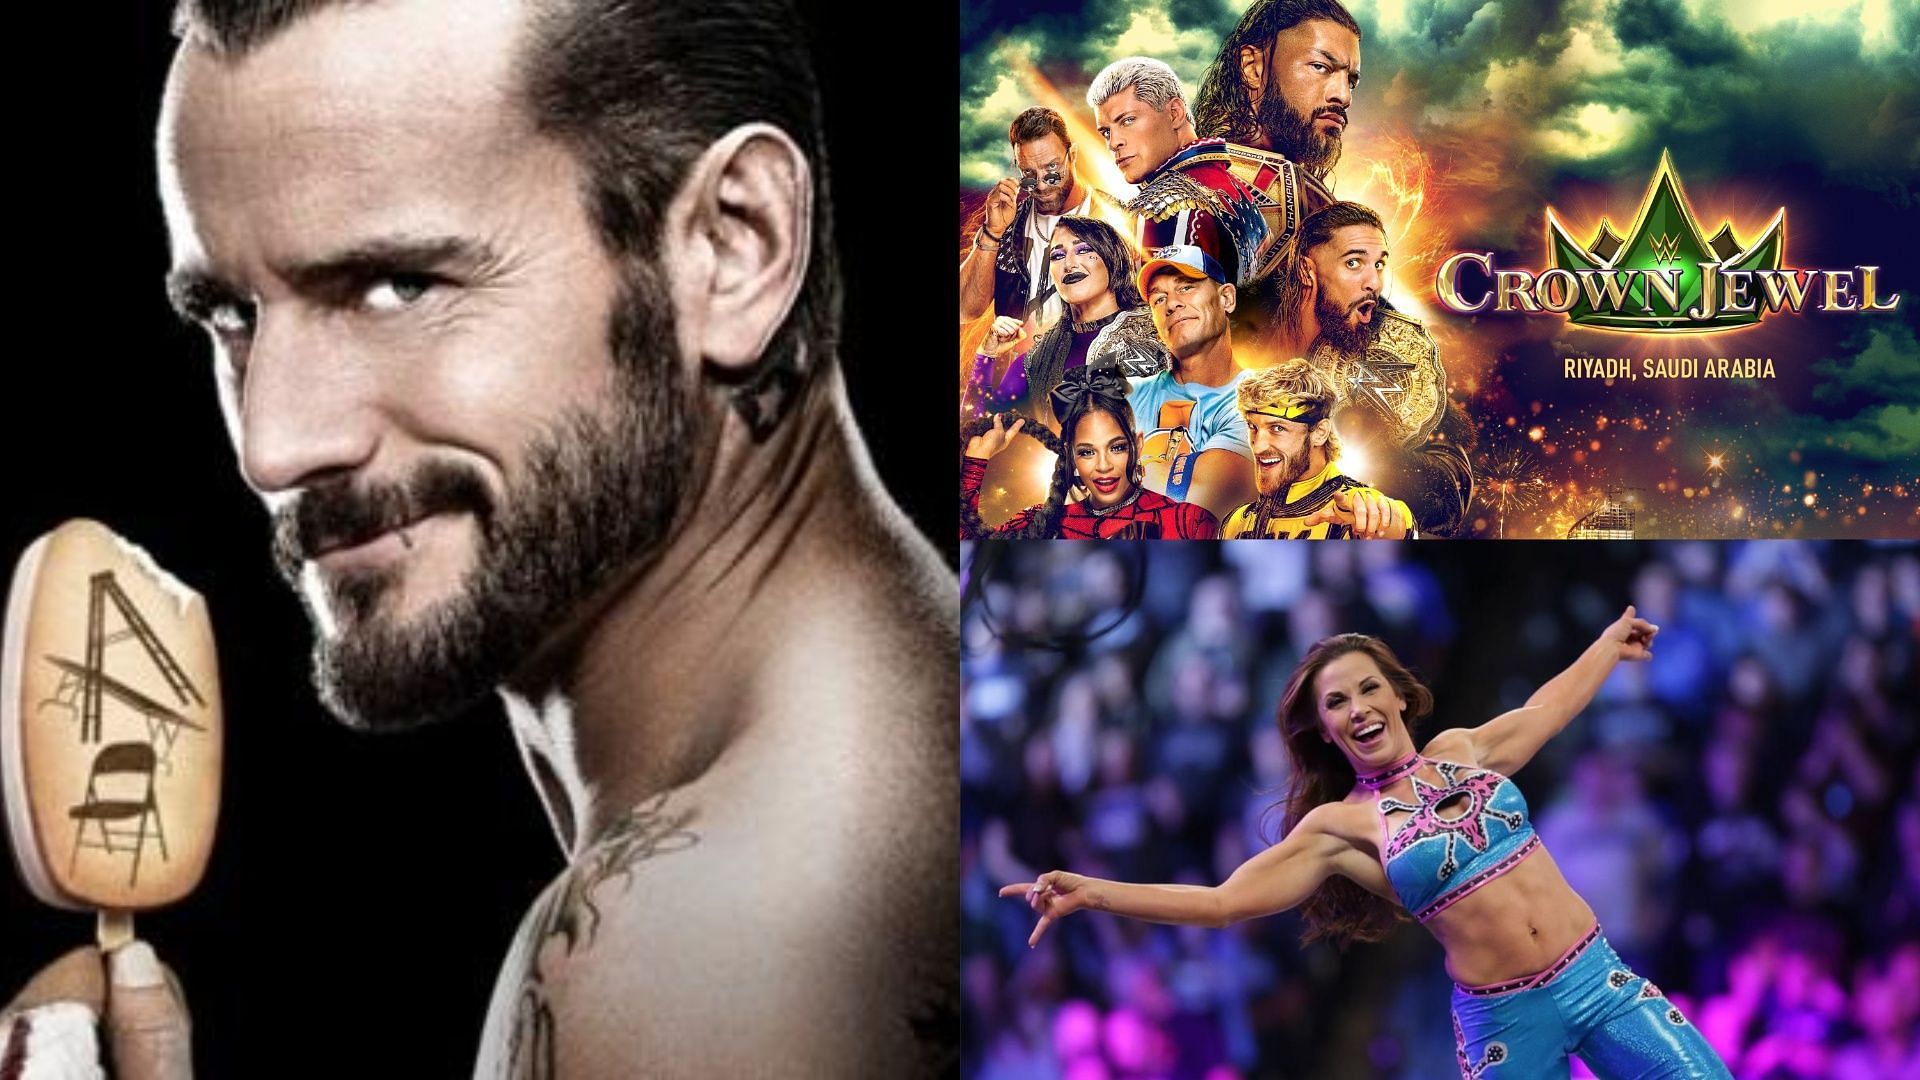 Will CM Punk and Mickie James return to WWE?